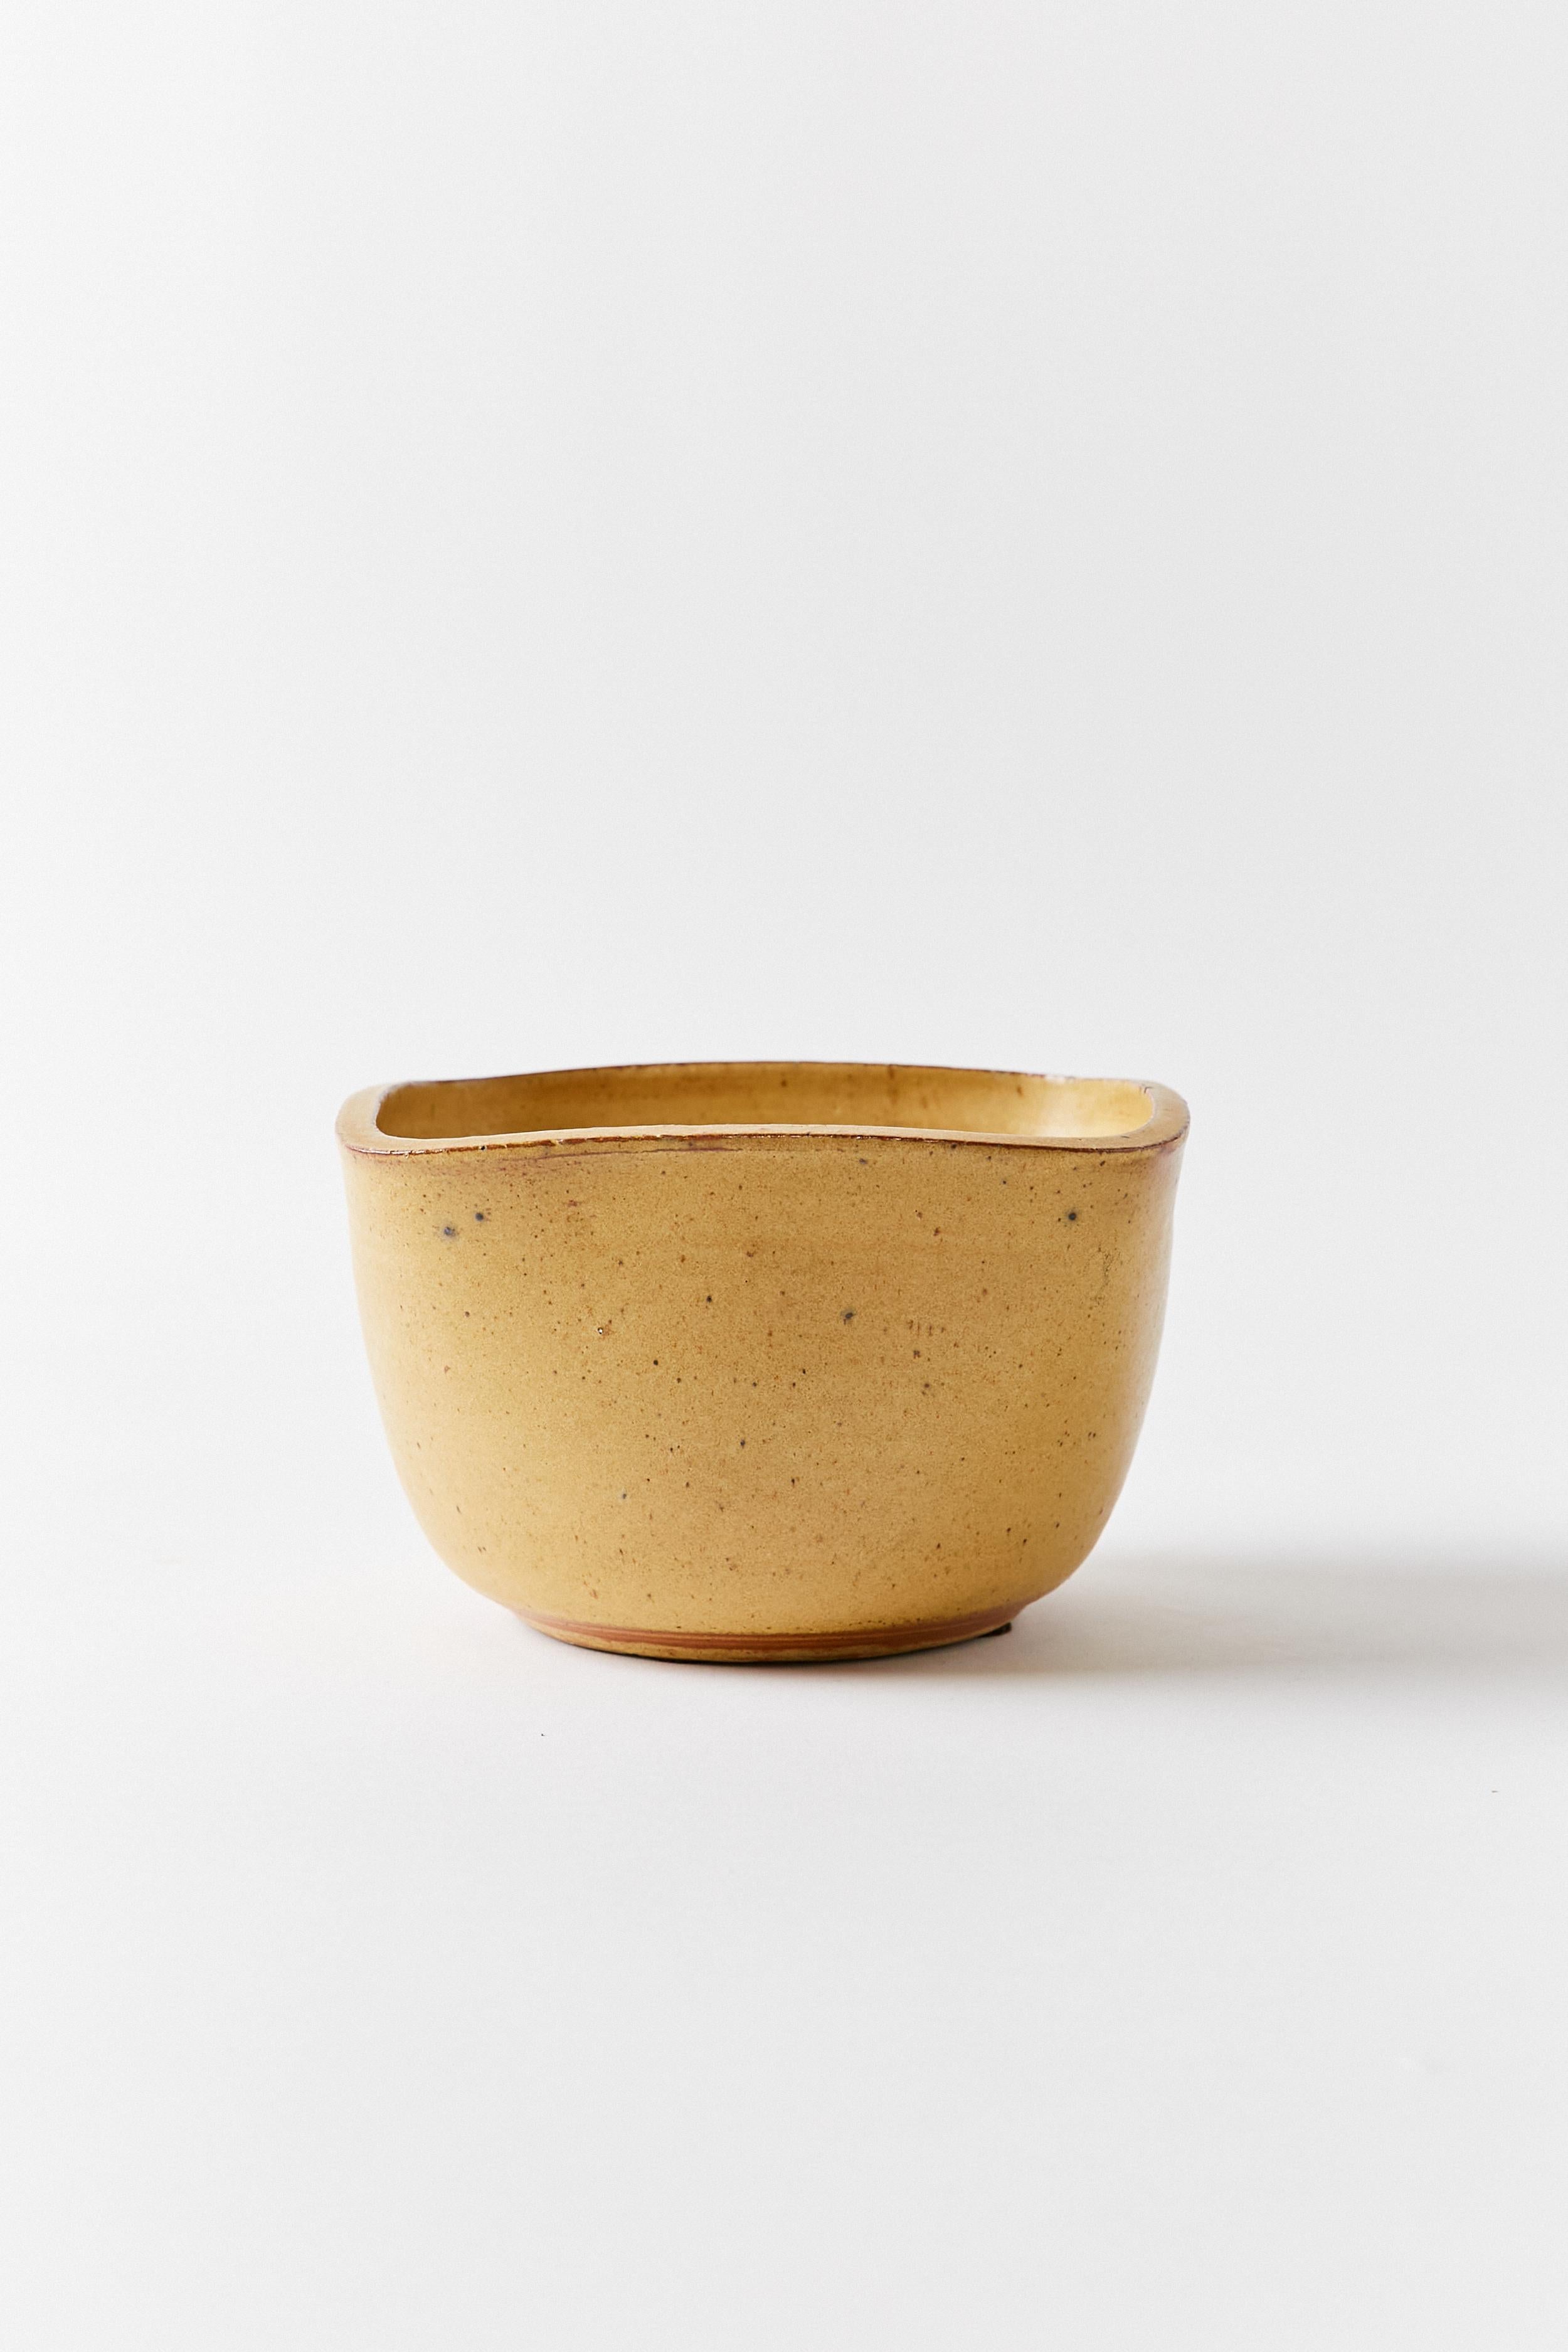 Square lip ceramic bowl in burnt yellow. The piece shows a fluid shape with round corners. Stamped NOA on the base.